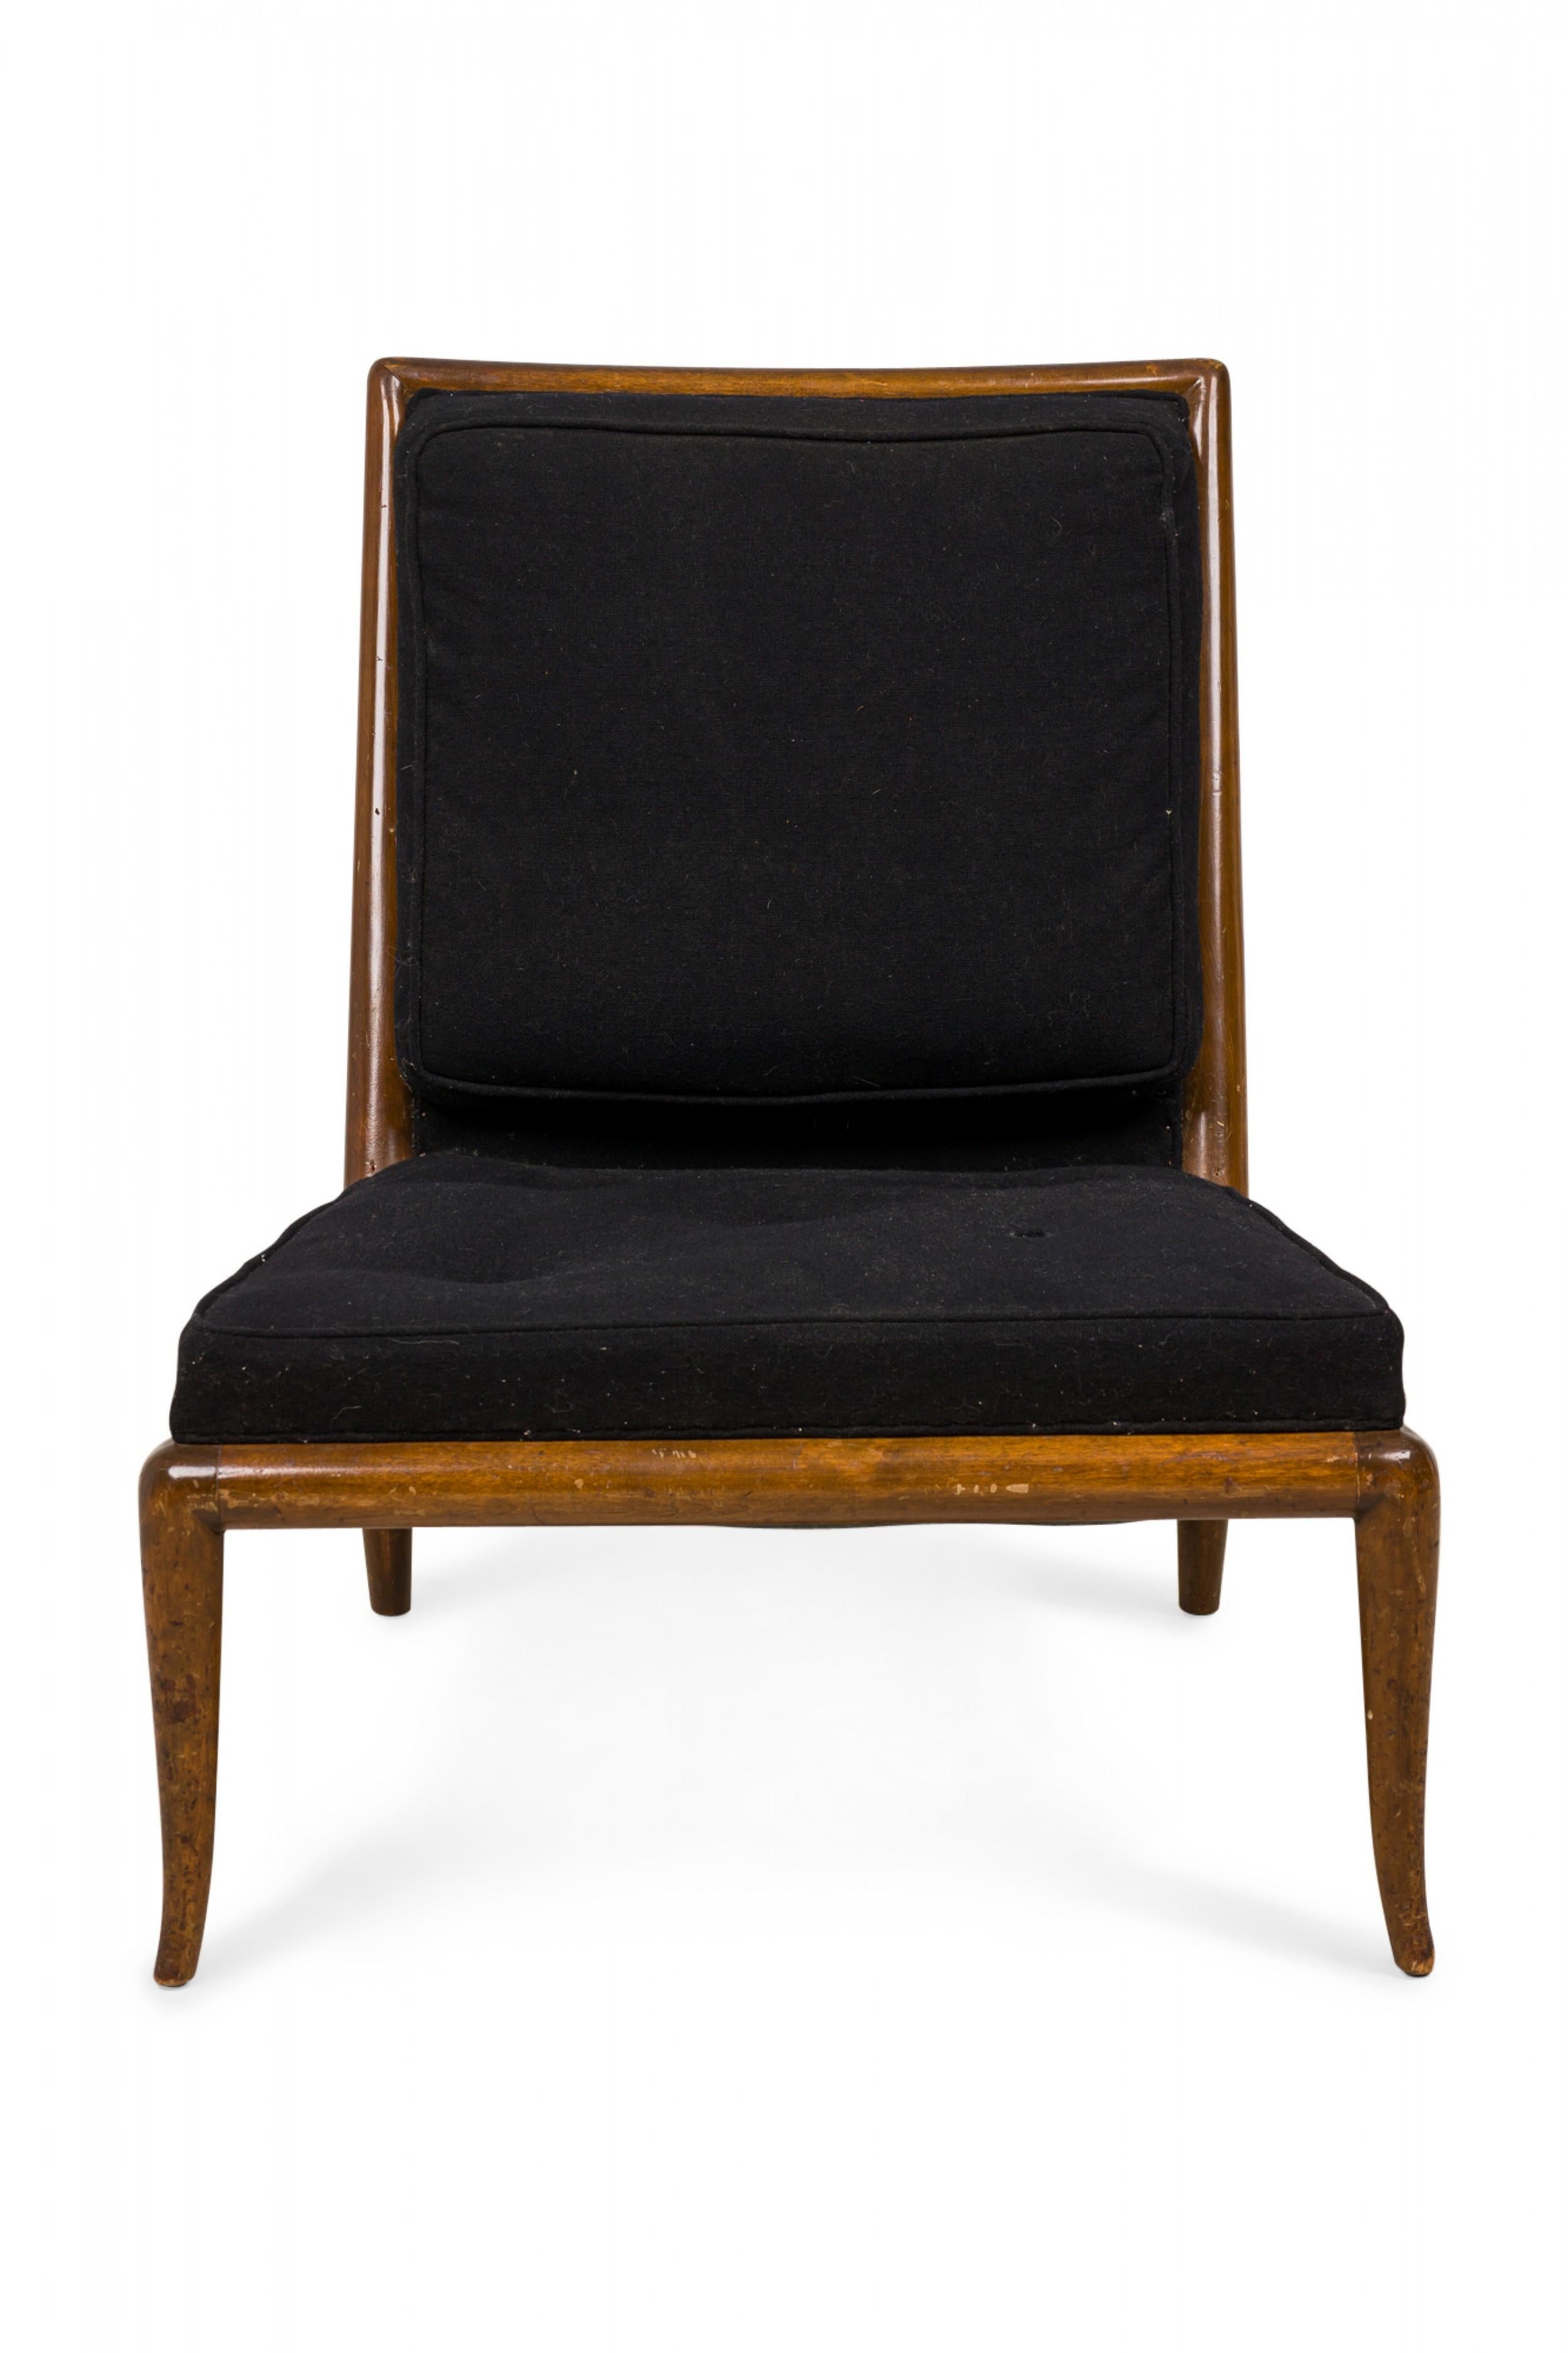 PAIR of Mid-Century slipper / side chairs with black fabric upholstery with button tufted detail, and a walnut frame, resting on four gently curved and tapered legs. (T.H. ROBSJOHN-GIBBINGS FOR WIDDICOMB)(Similar pieces: DUF0544, DUF0545)
